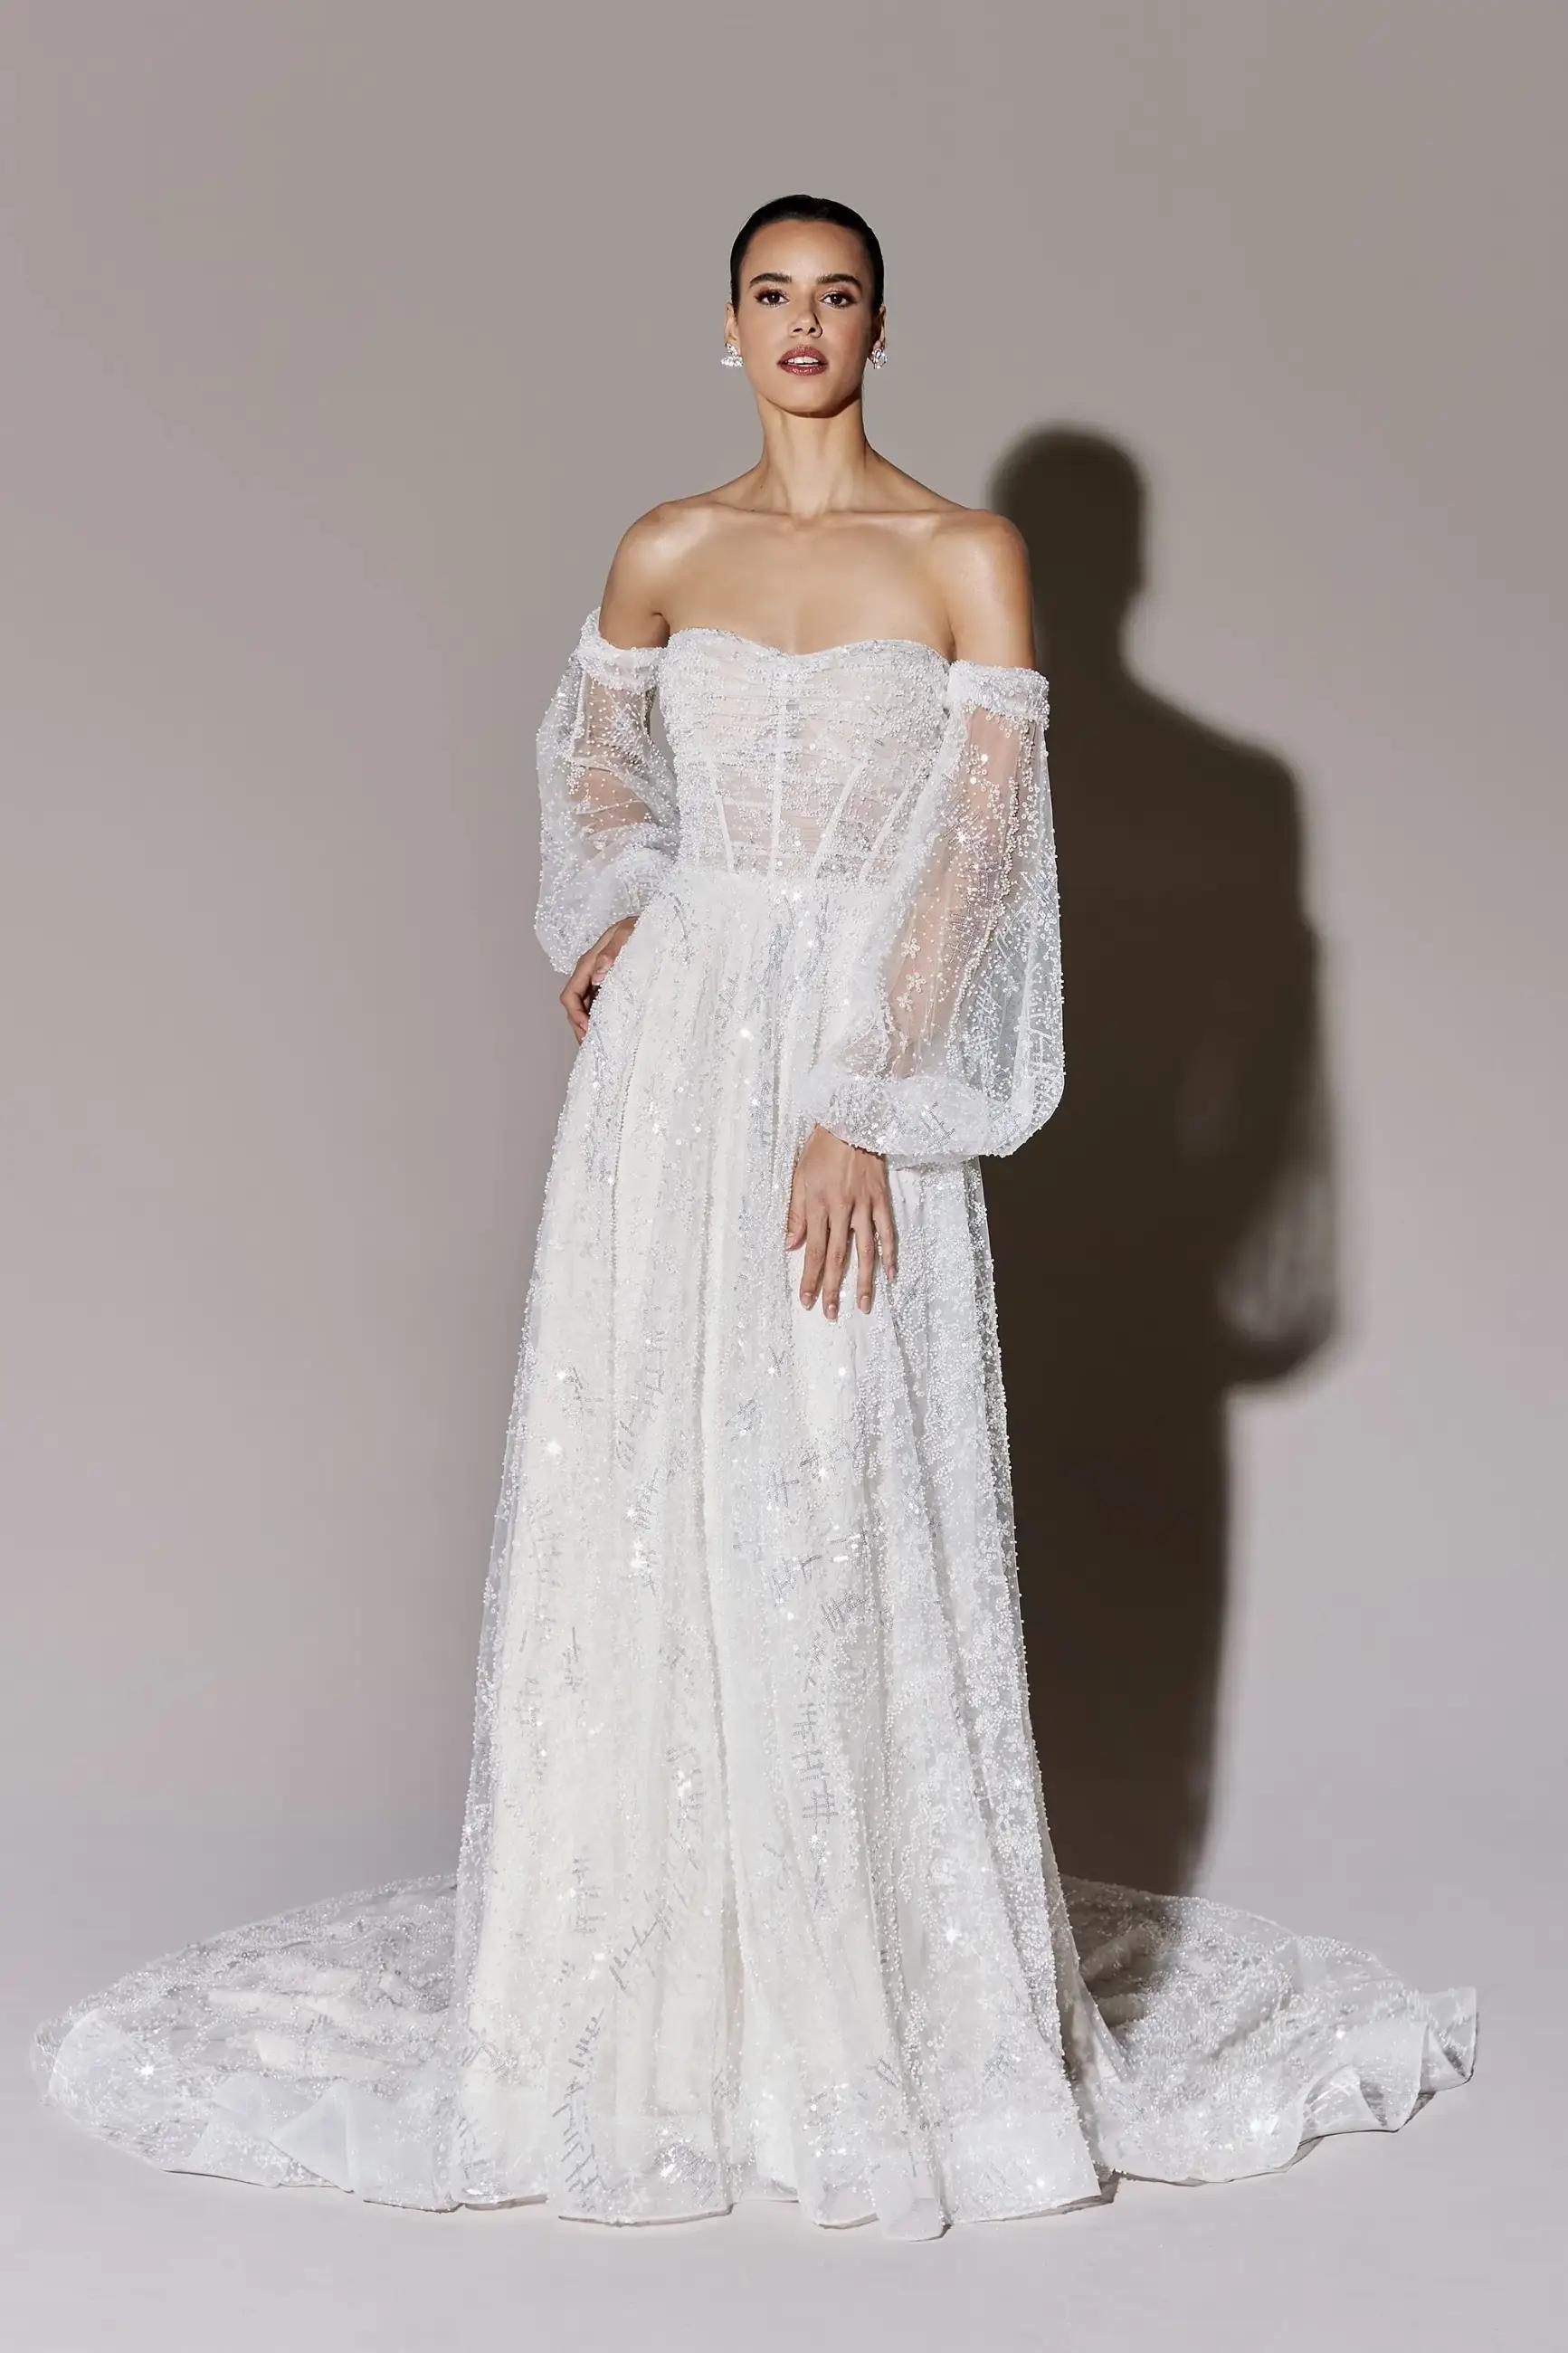 Elevating Your Bridal Look with Sassy Sleeve Style Image